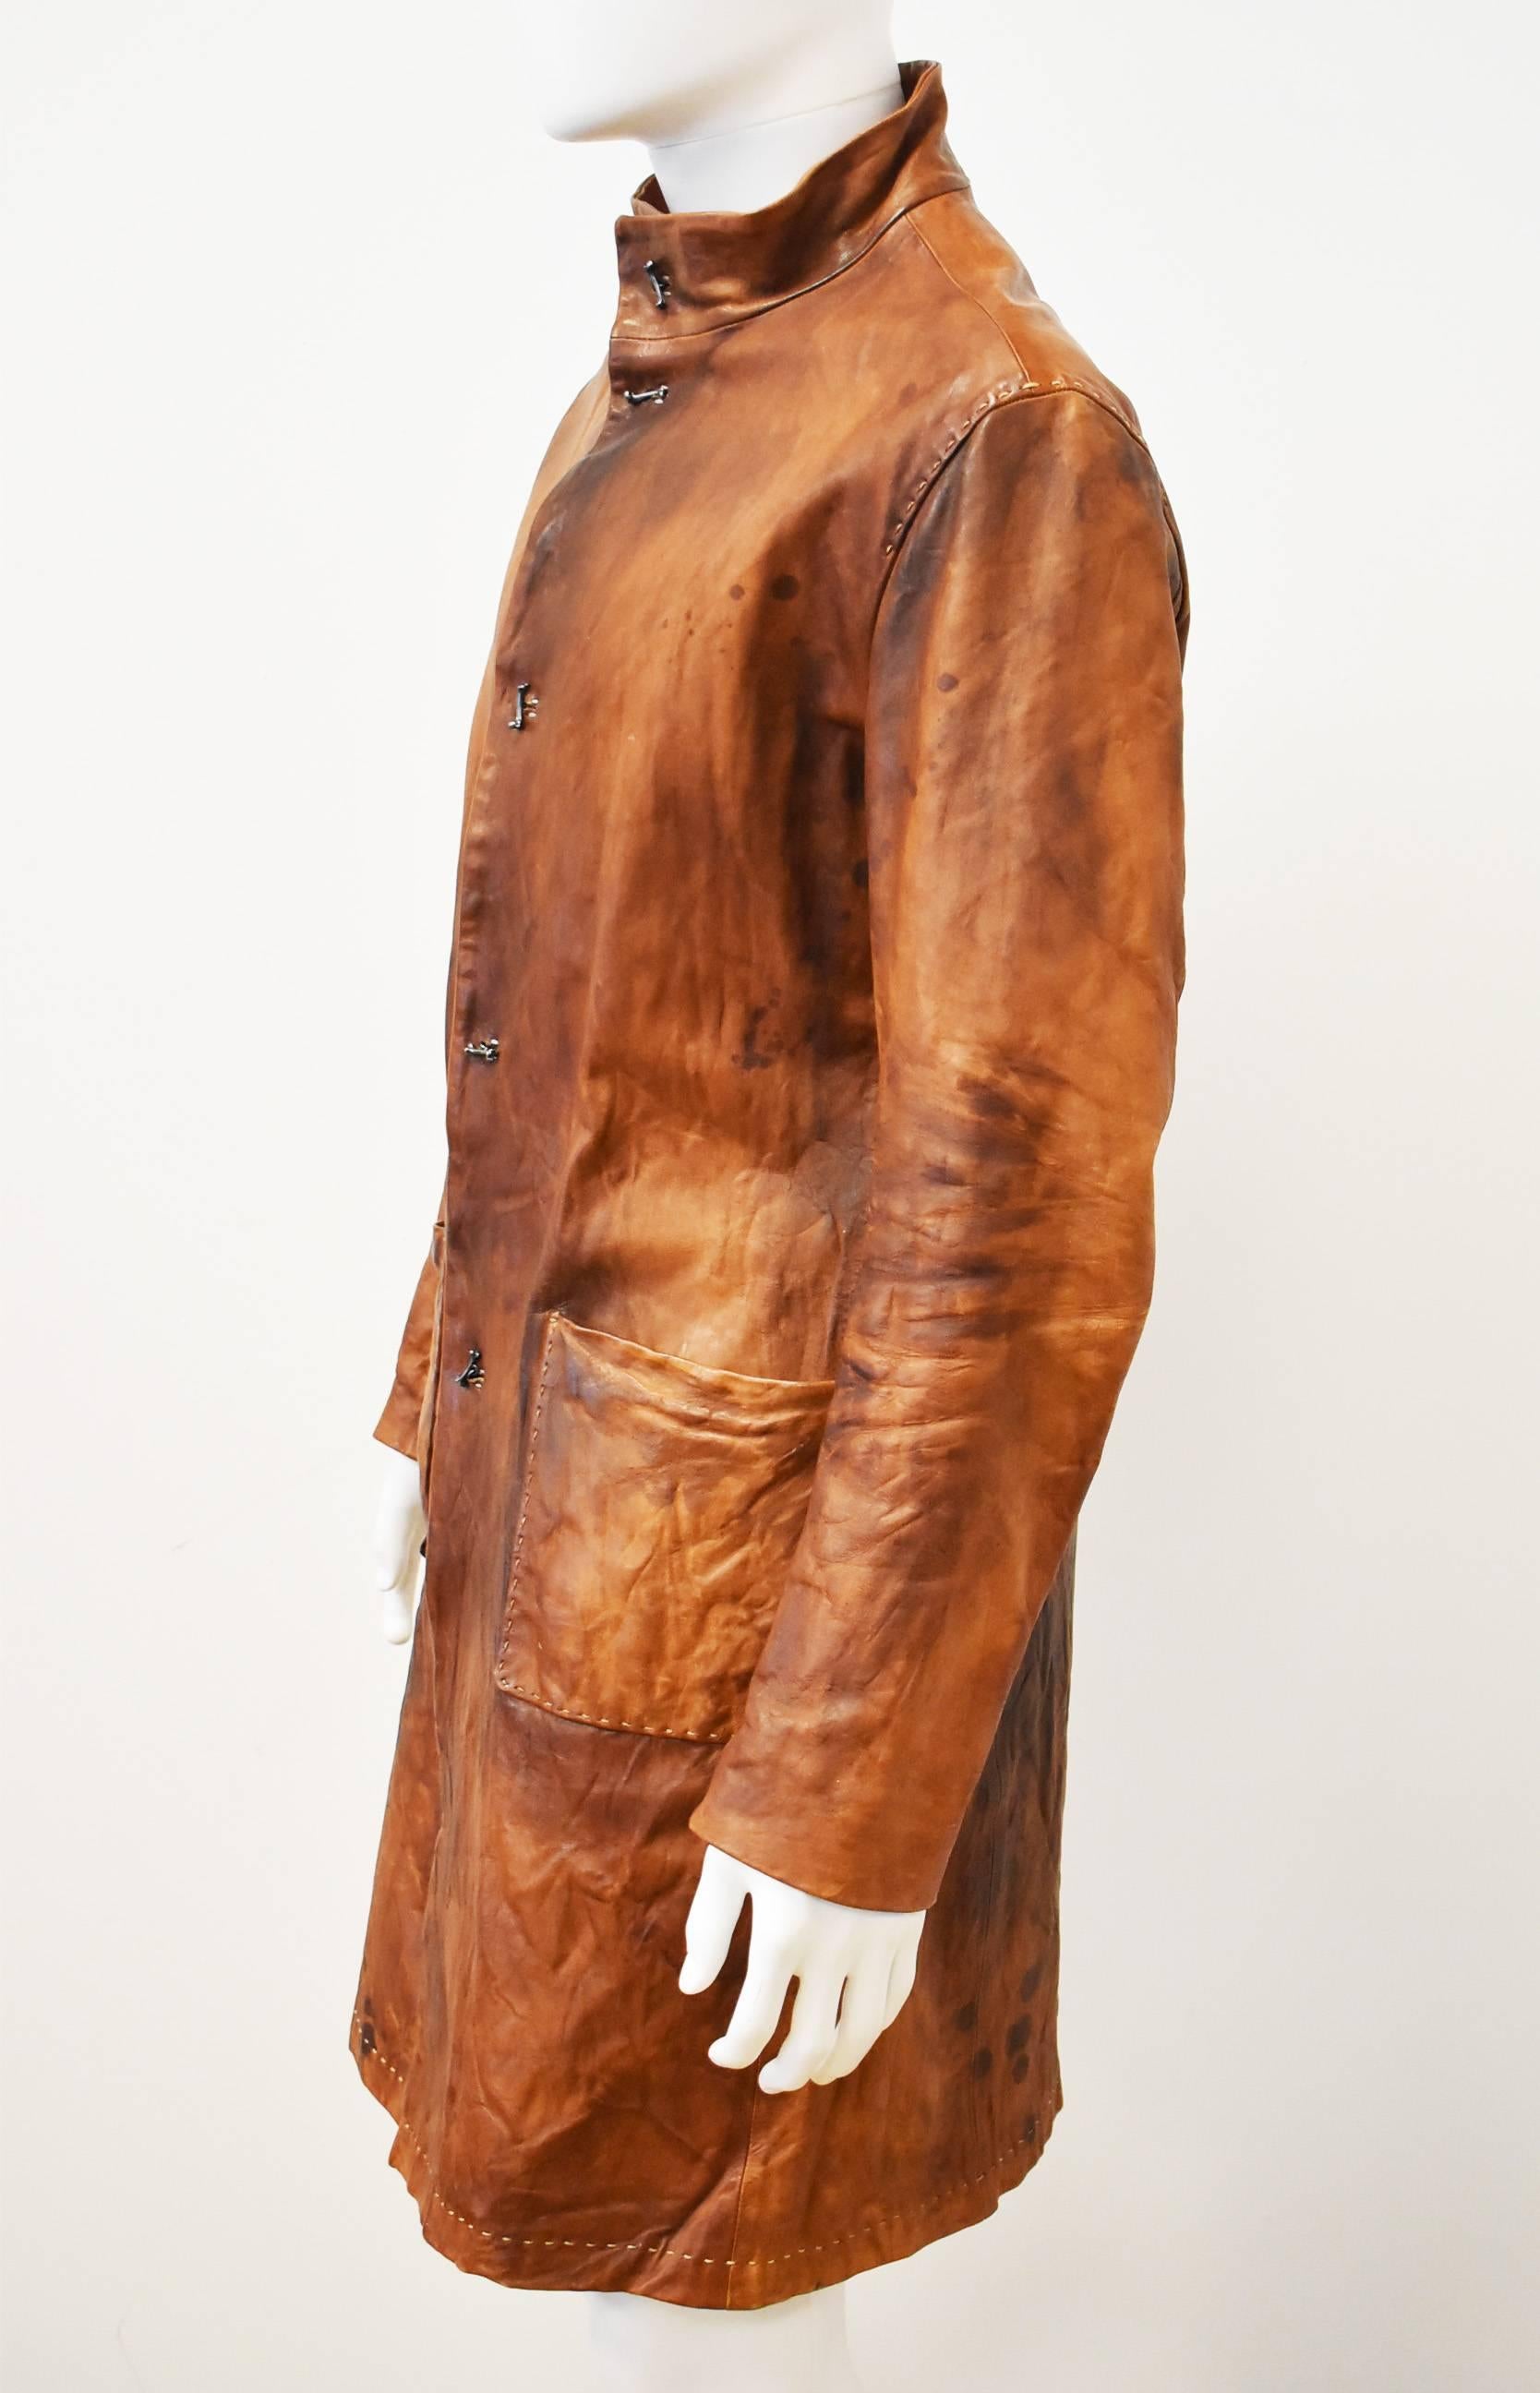 This beautiful and unique coat is made by Japanese leather artist Hideo Motoike. The artist is known for making sculptures, art, clothing and shoes entirely from leather. The coat is made from tan coloured ’distressed’ leather, with a deliberately